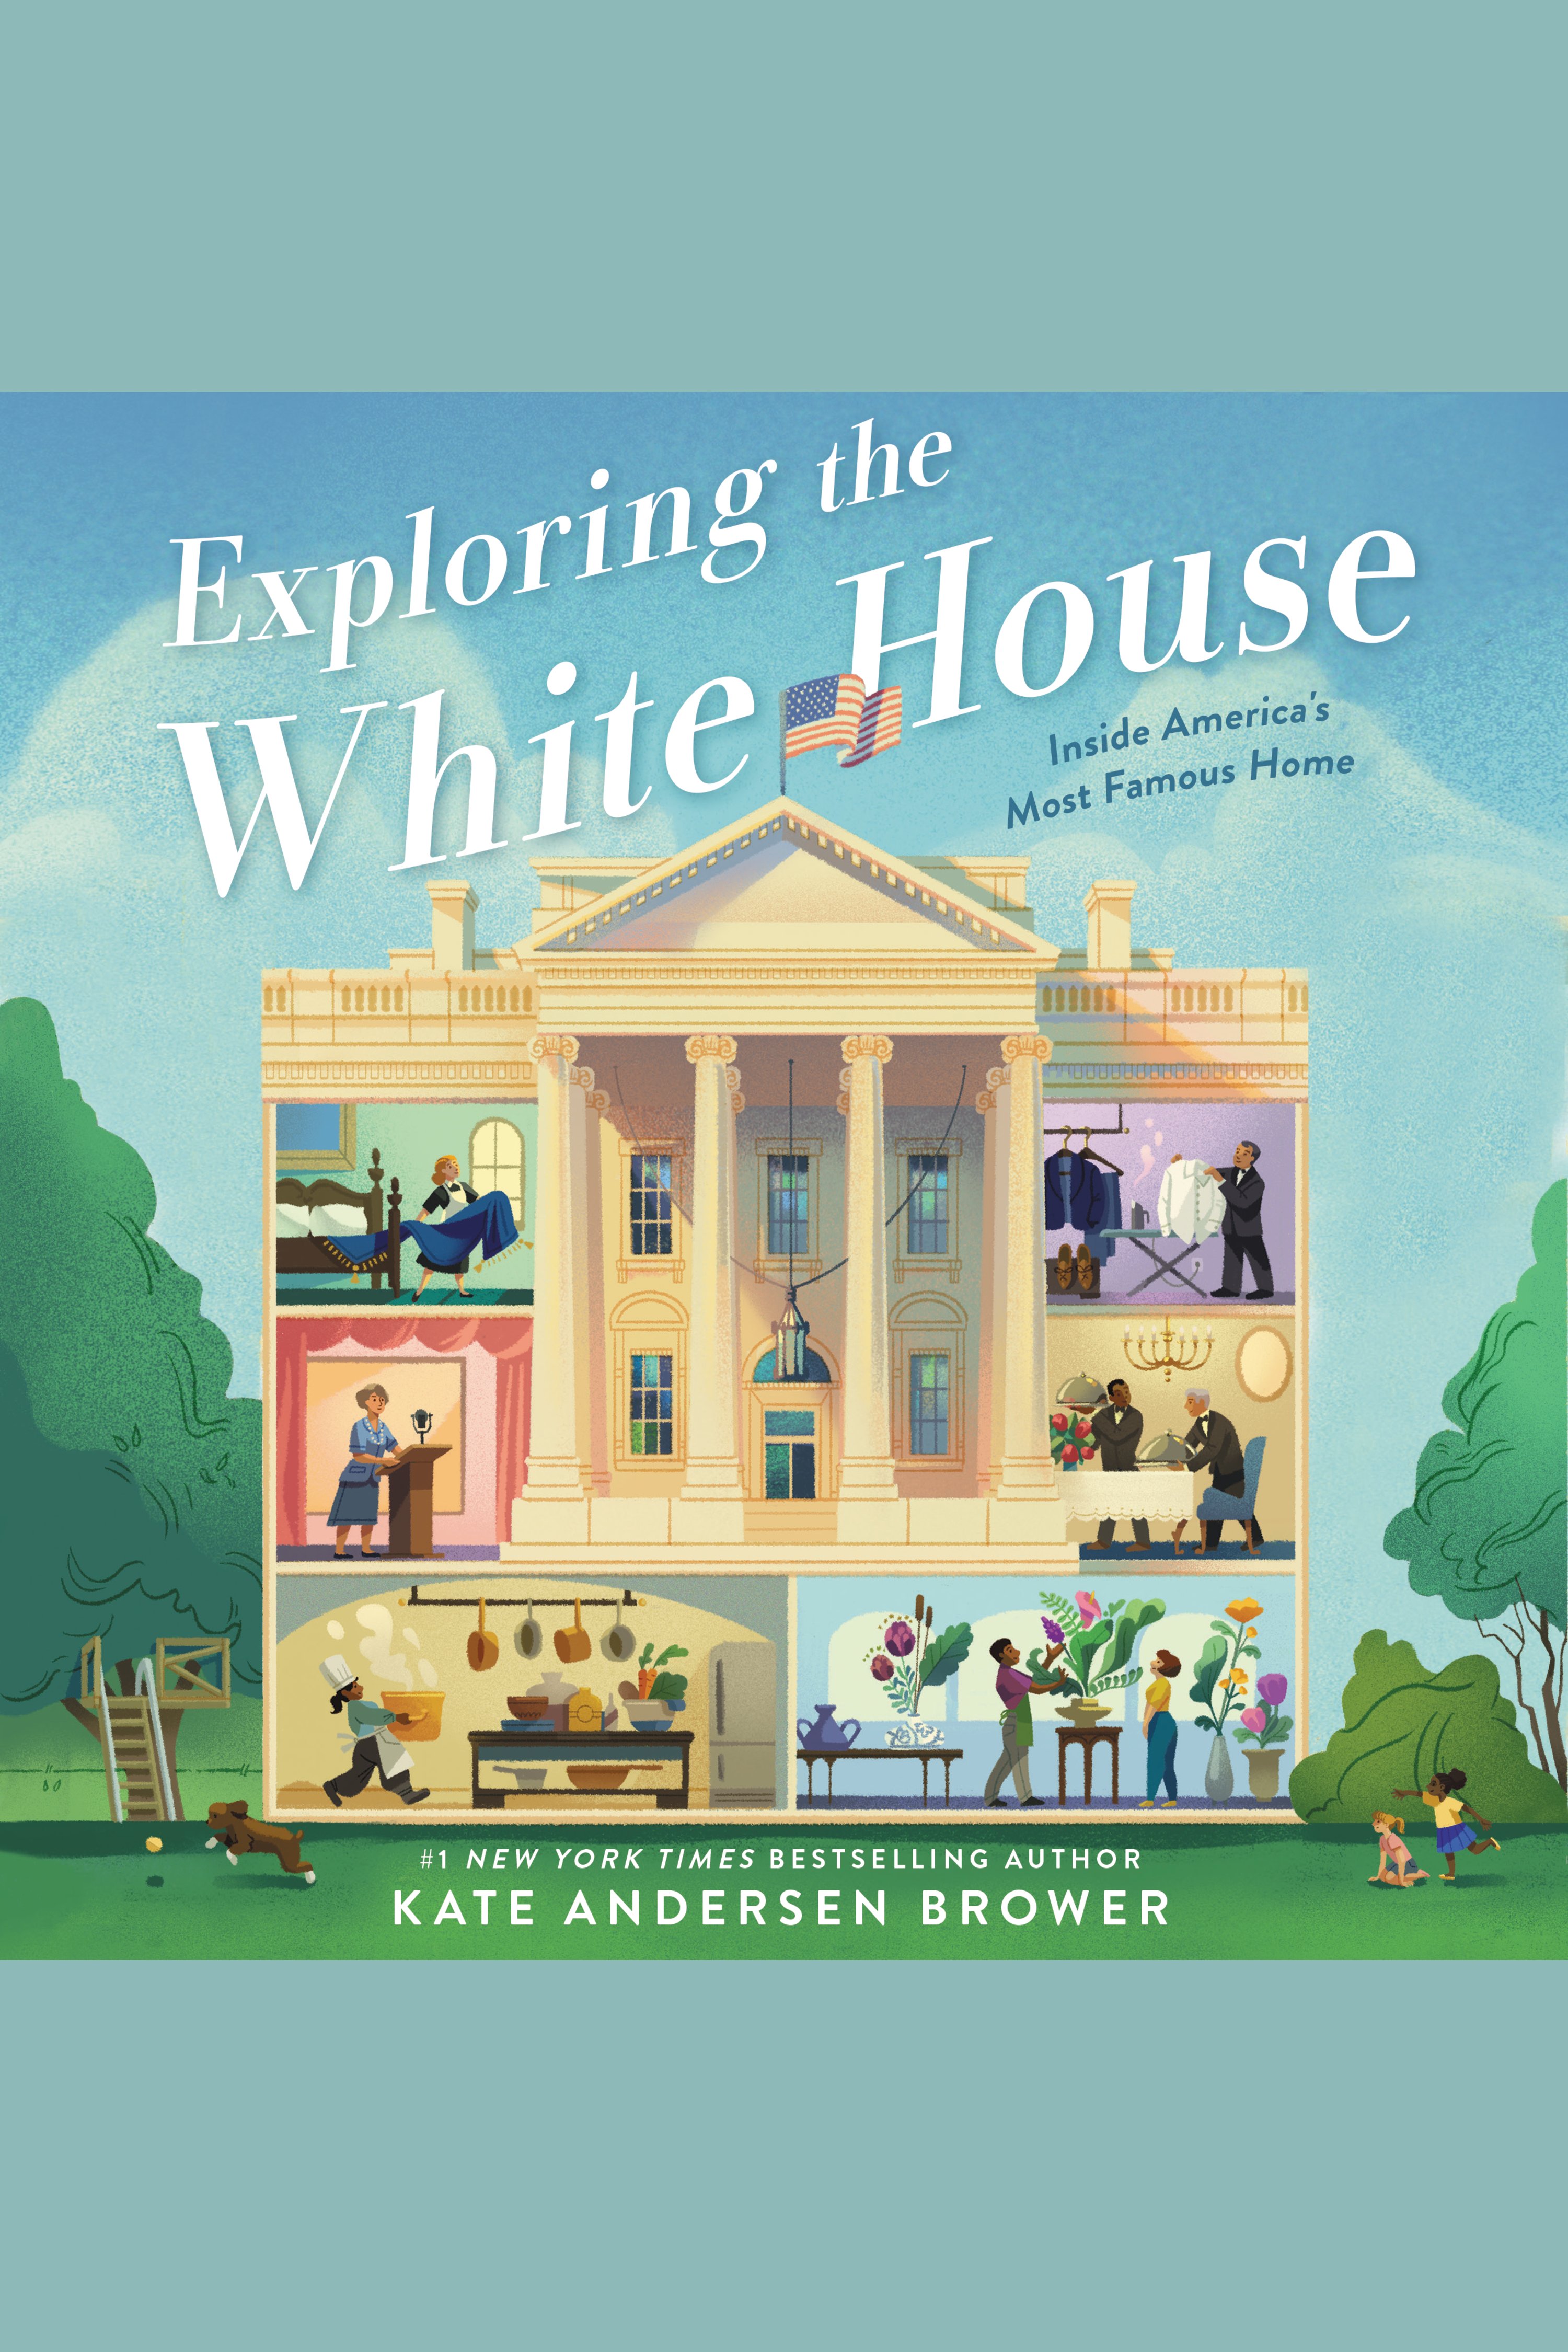 Exploring the White House: Inside America's Most Famous Home cover image